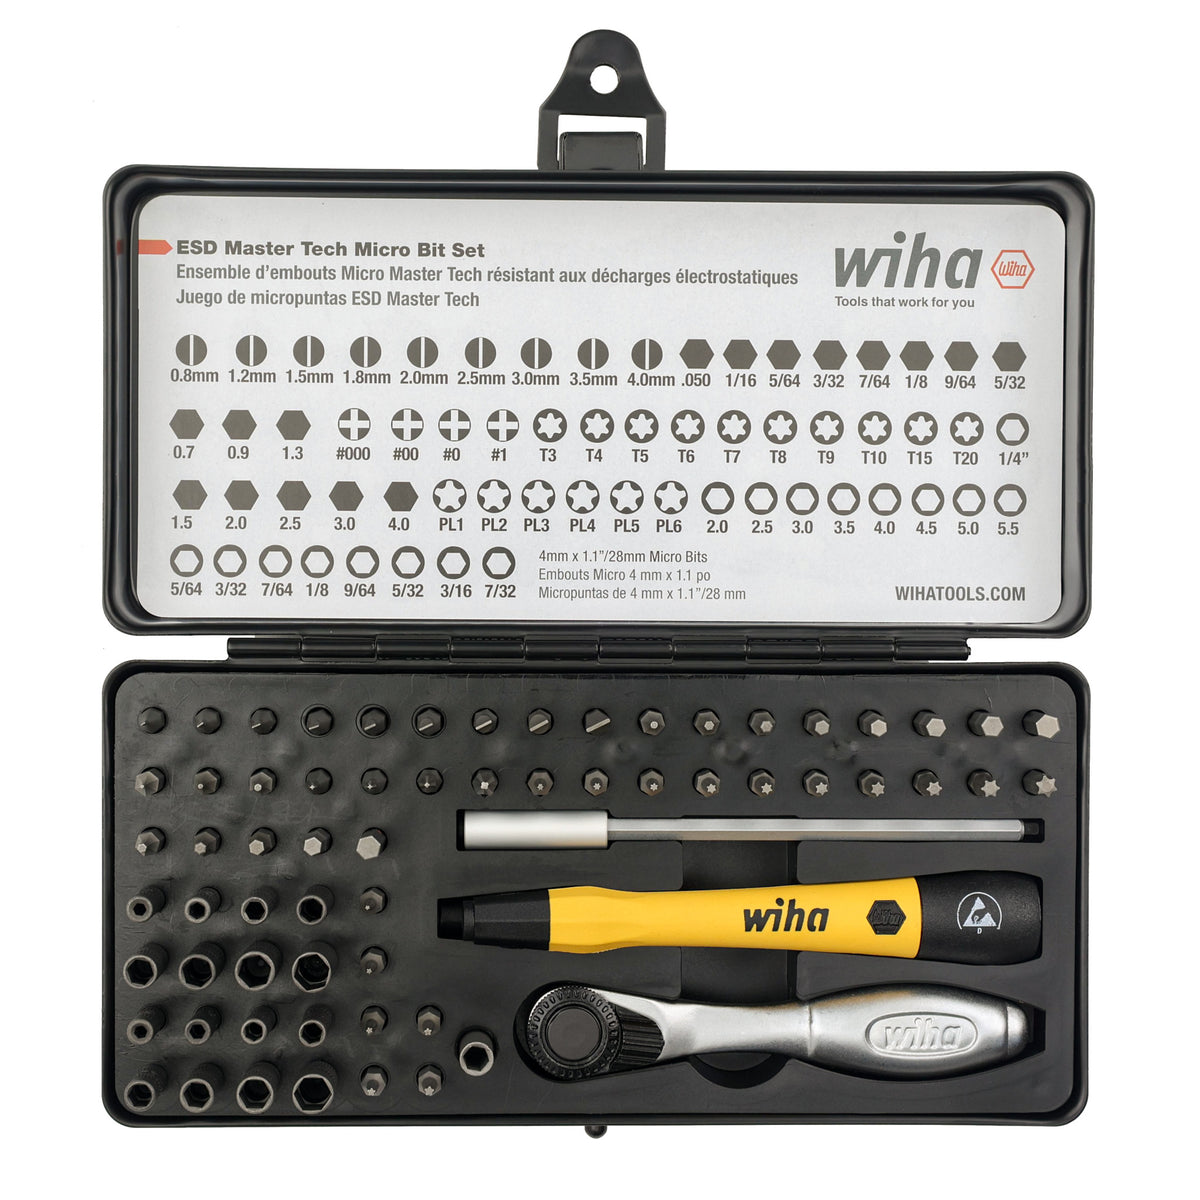 Tetra Electric - Wiha is definitely one of the best brands of hand tools  that you can have, I have been using their tools for more than 8 years  without any complaints